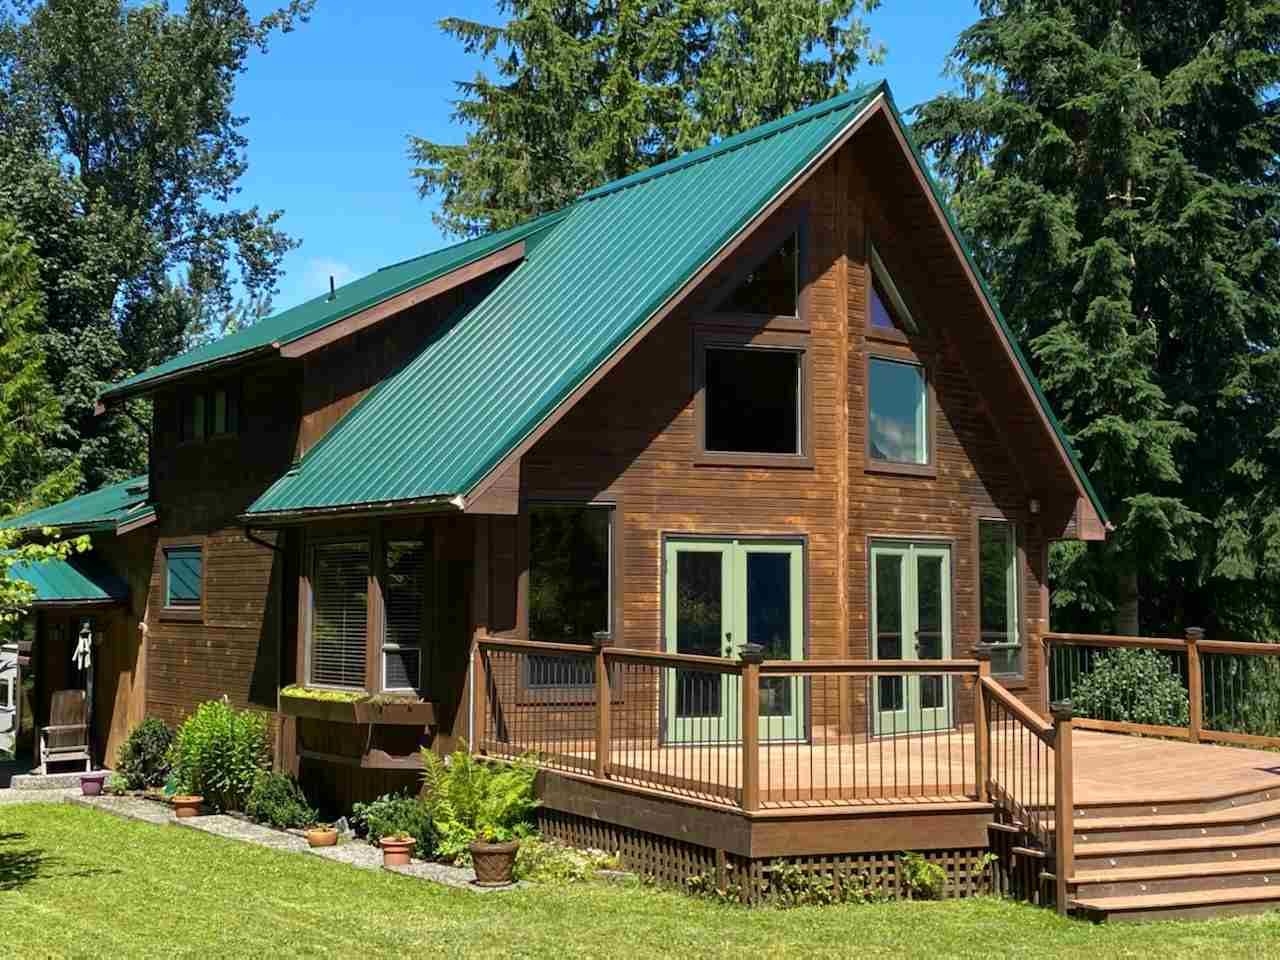 New property listed in Ryder Lake, Sardis